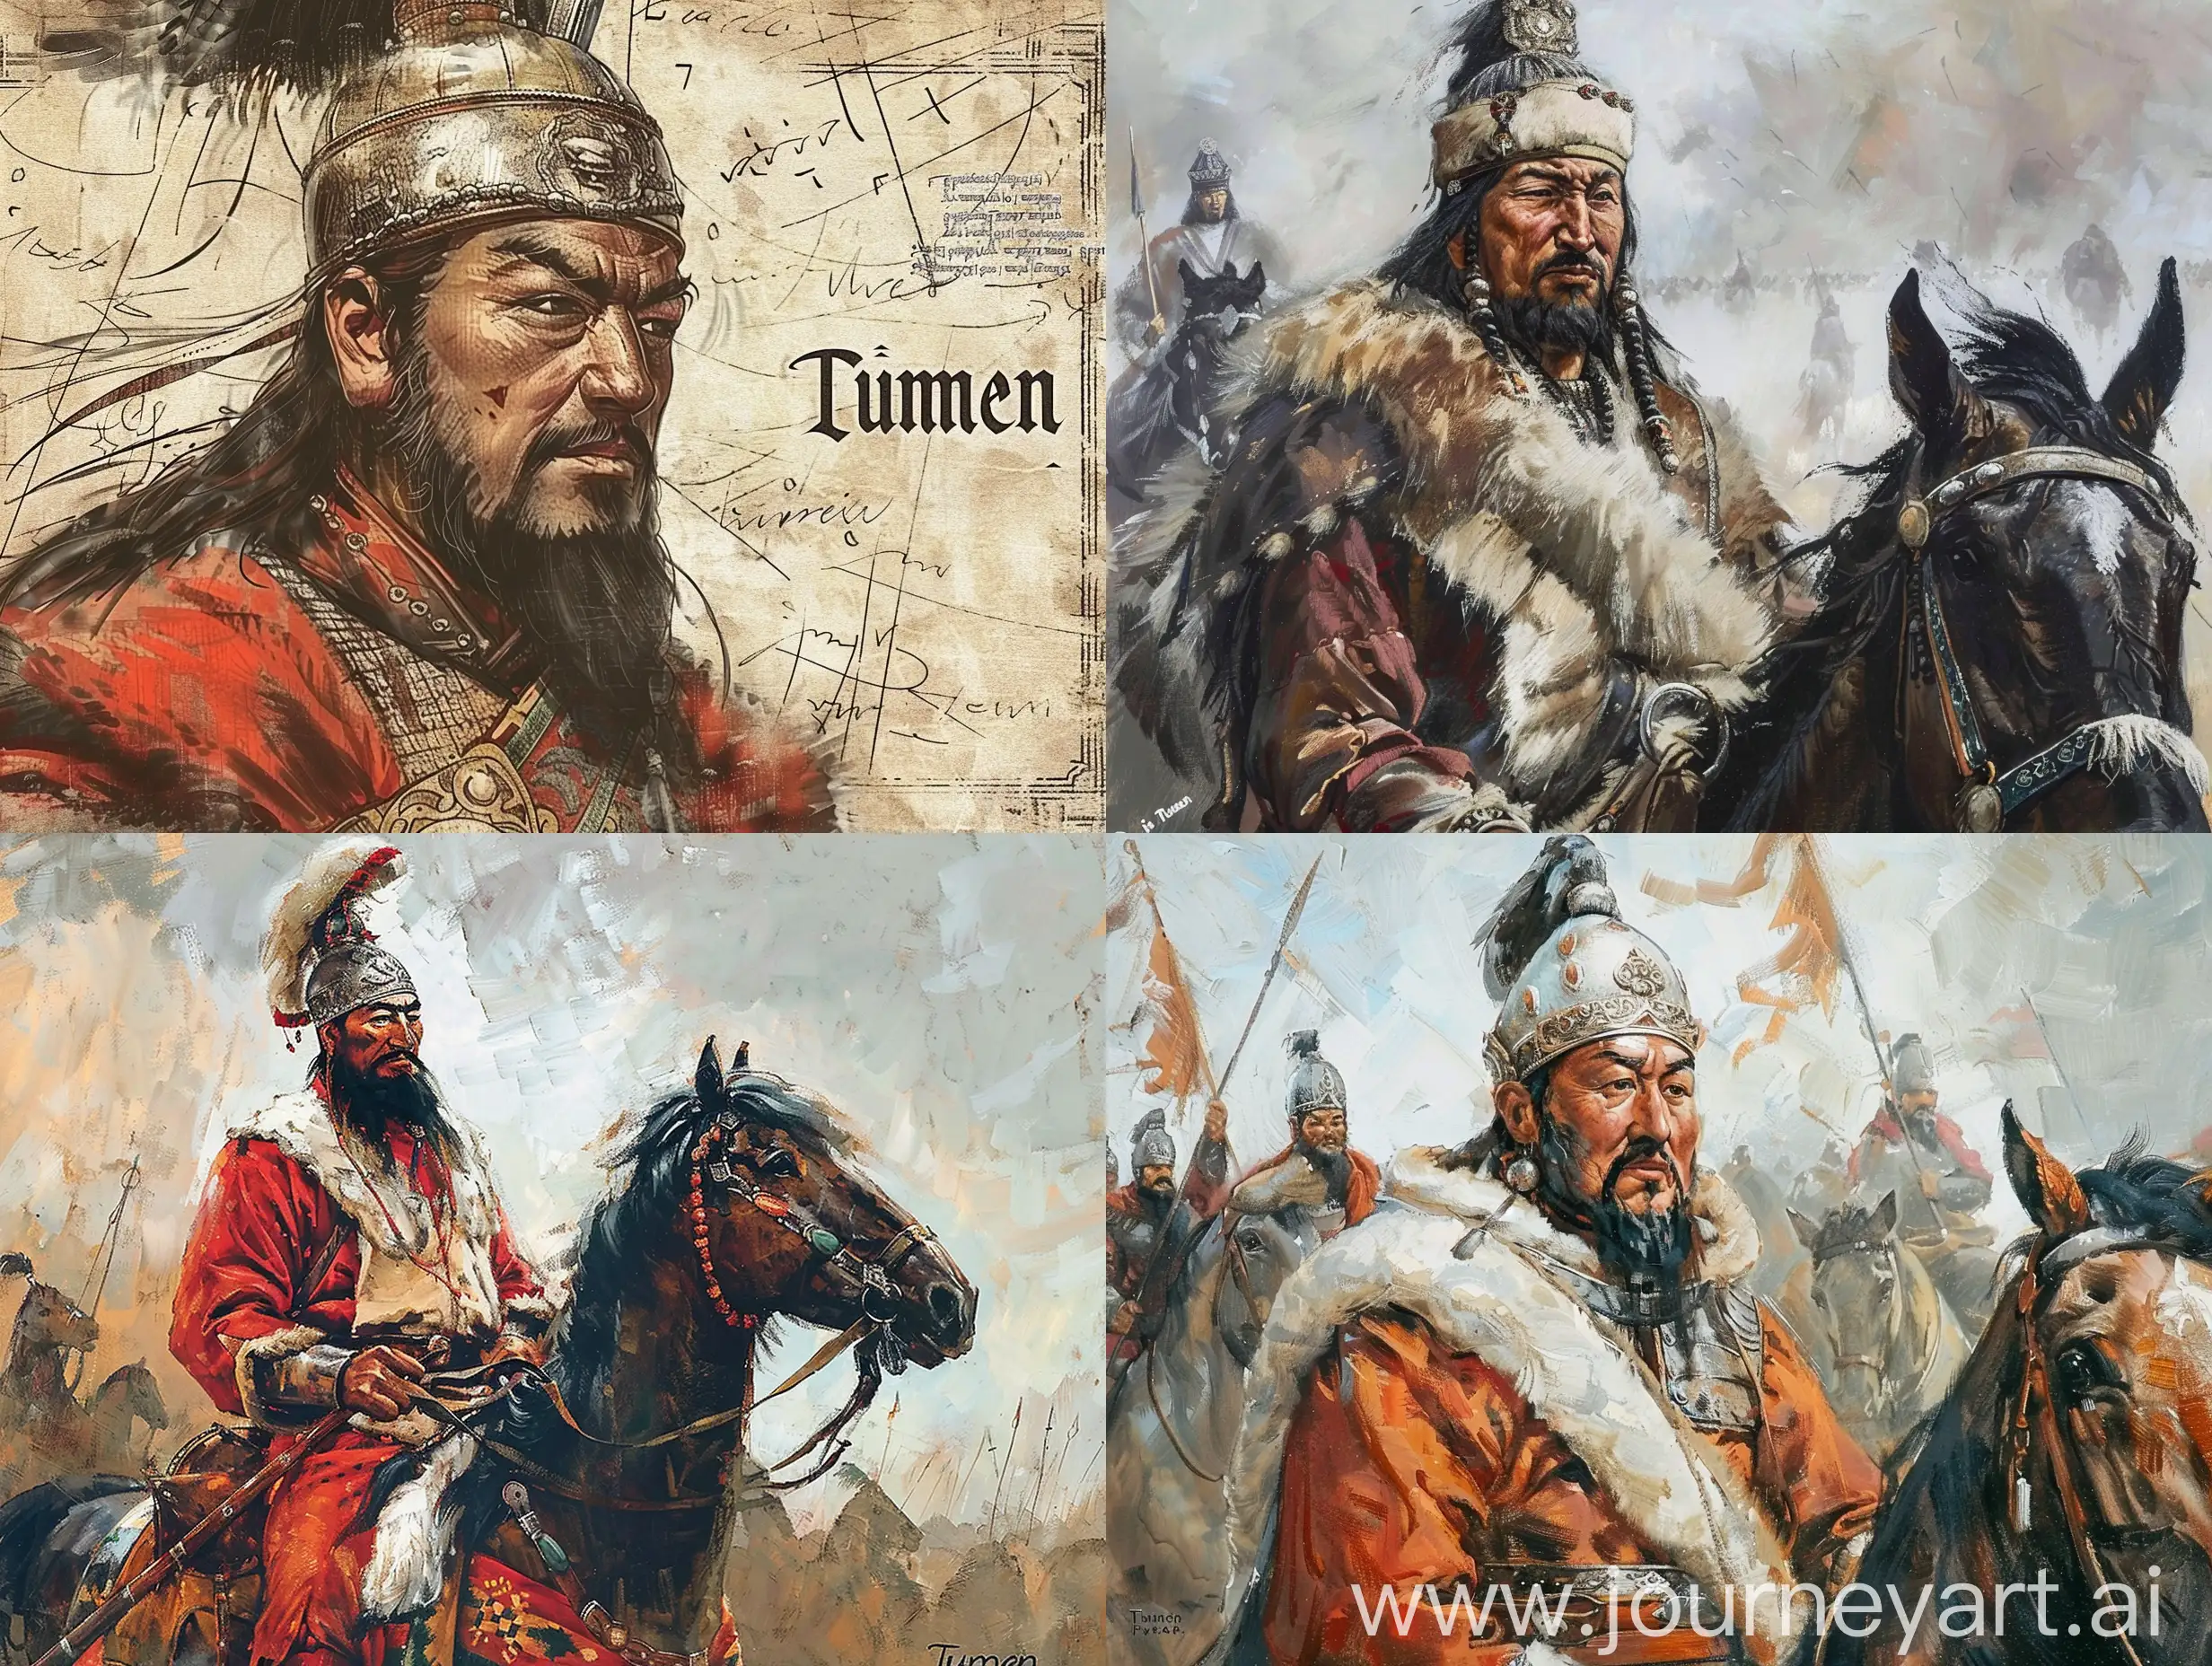 Bumin Khan, also known as Illig Khan, founded the Turkic Khaganate as the eldest son of Ashina Tuwu and became the chief of the Turks of the Rouran Khaganate, also known as “Tumen”.